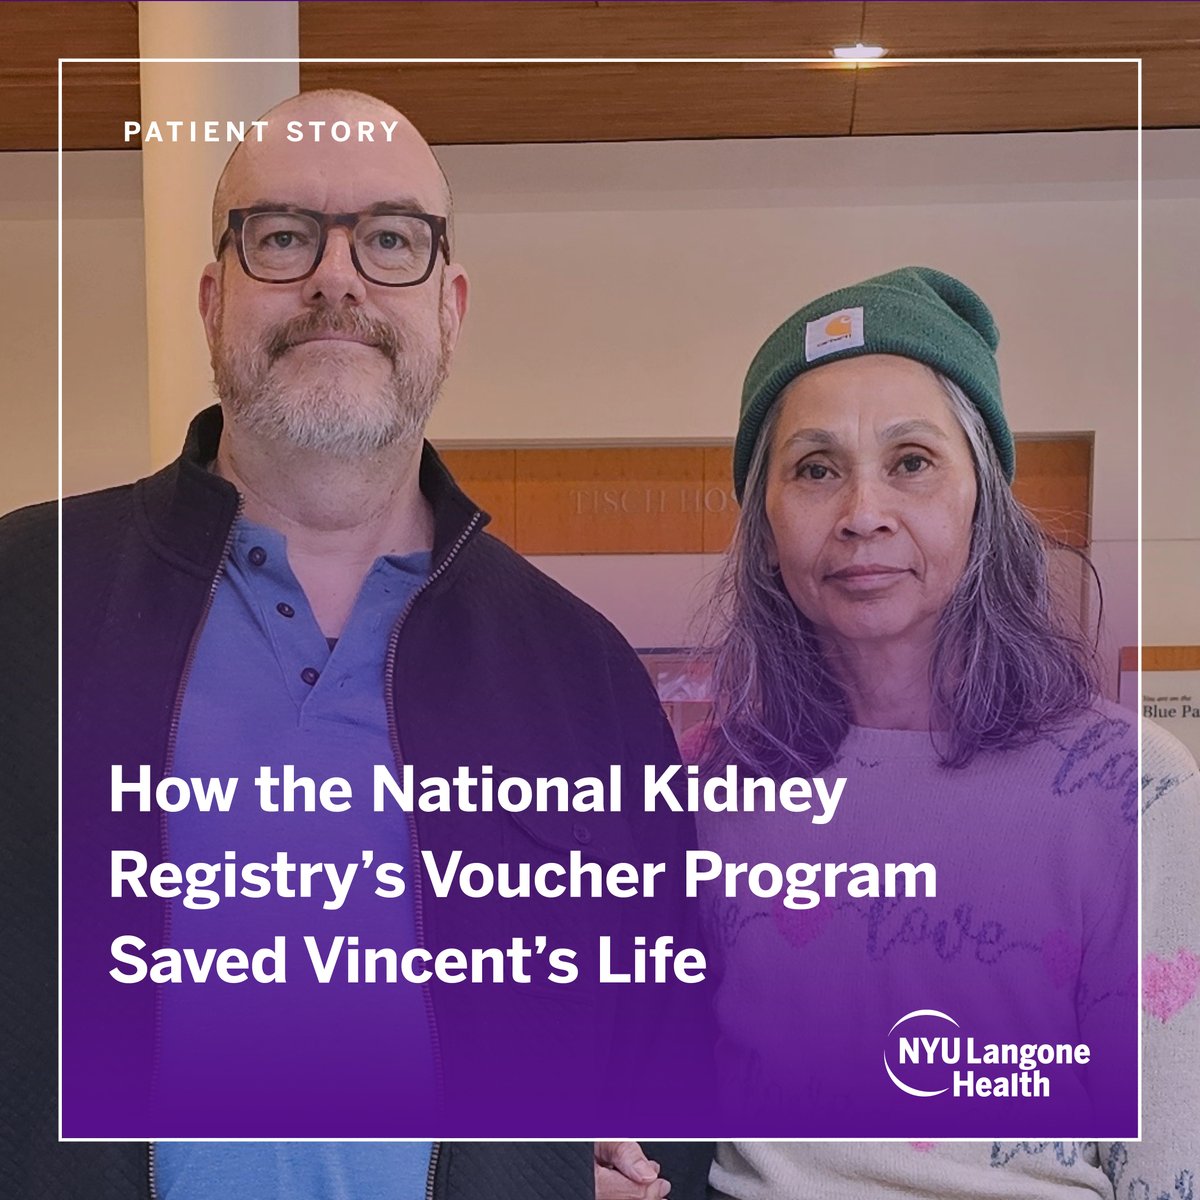 Vincent needed a new kidney, and his wife Griselda wanted to help. She donated a kidney to a stranger in hopes of getting Vincent off the waitlist sooner, and 54 days later, he got his new kidney at NYU Langone Health. Read their story: bit.ly/4b9EWPD